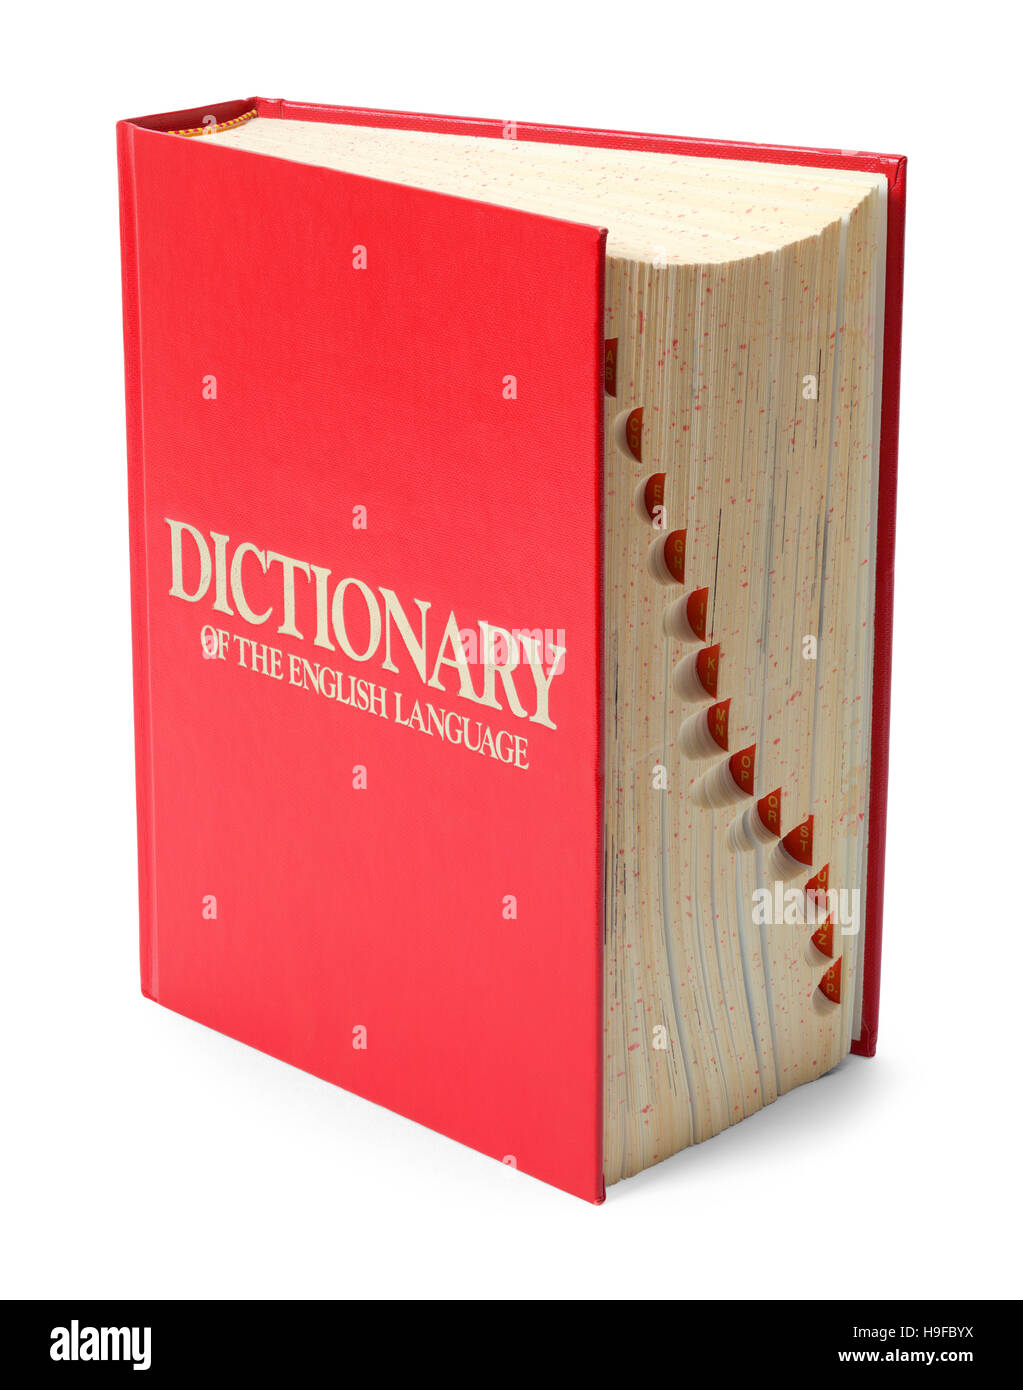 skraber endelse Stolthed Red English Dictionary Isolated on White Background Stock Photo - Alamy